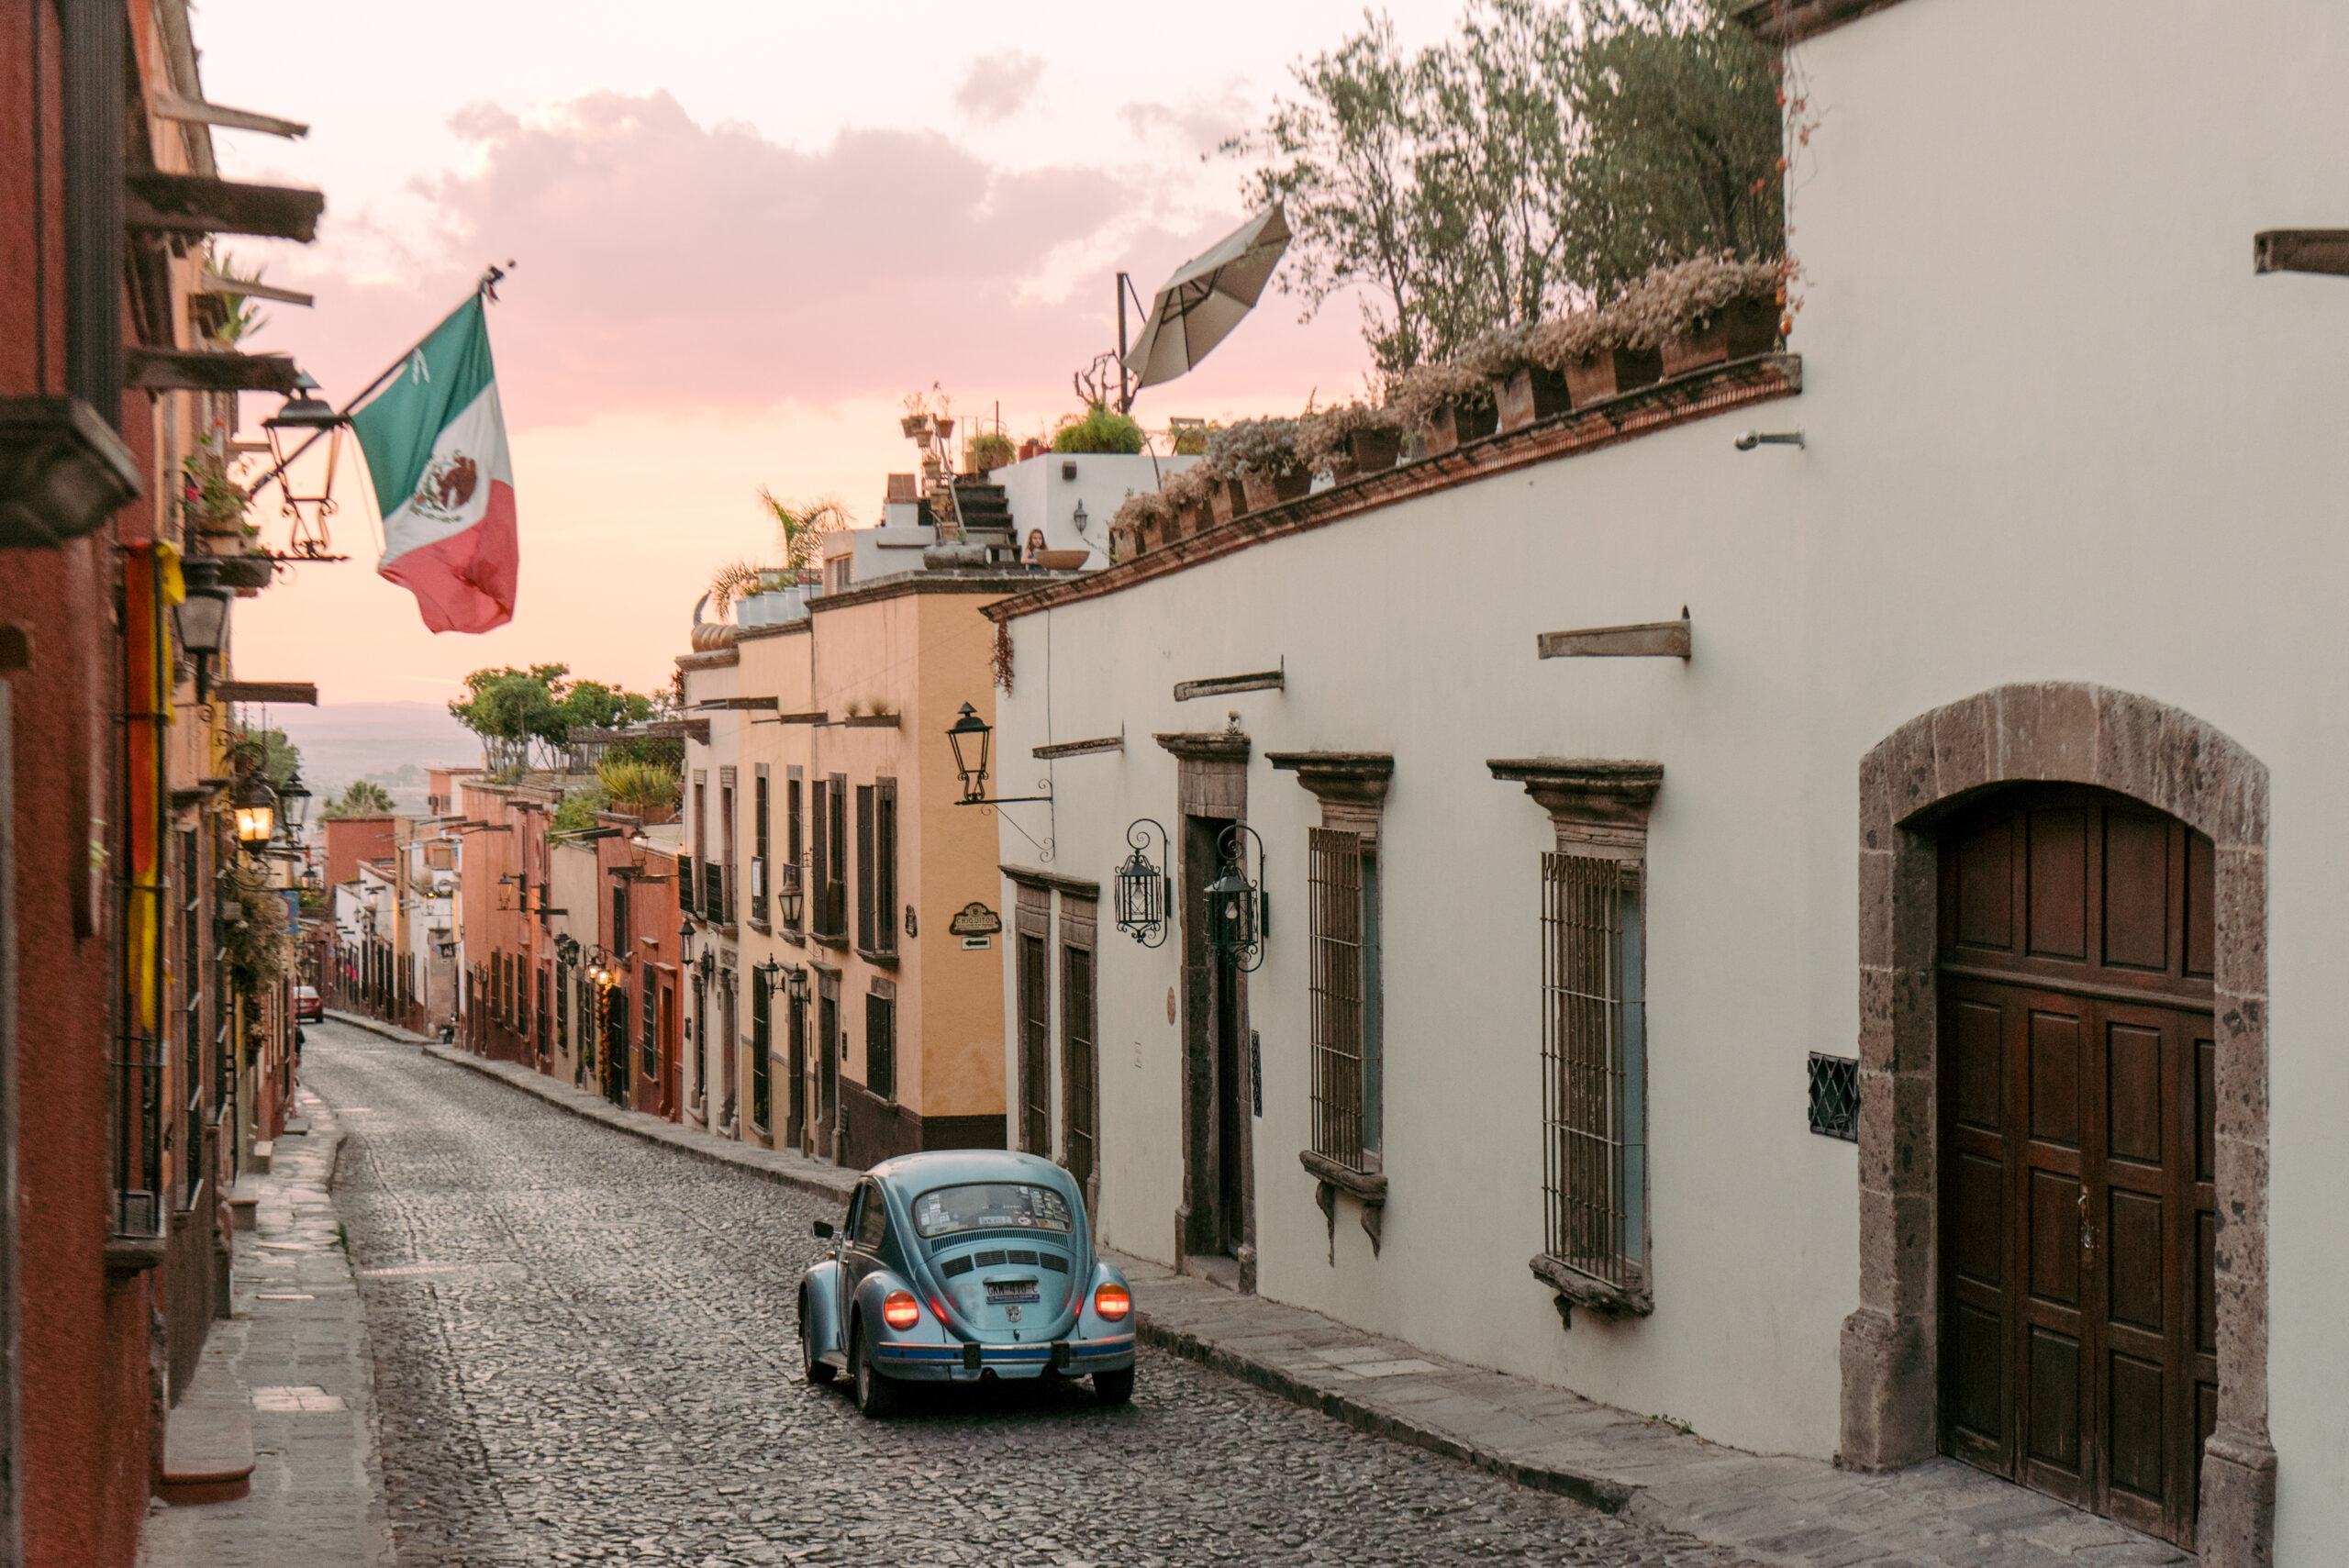 Mexico Data: House-Sitting and Travel by the Numbers